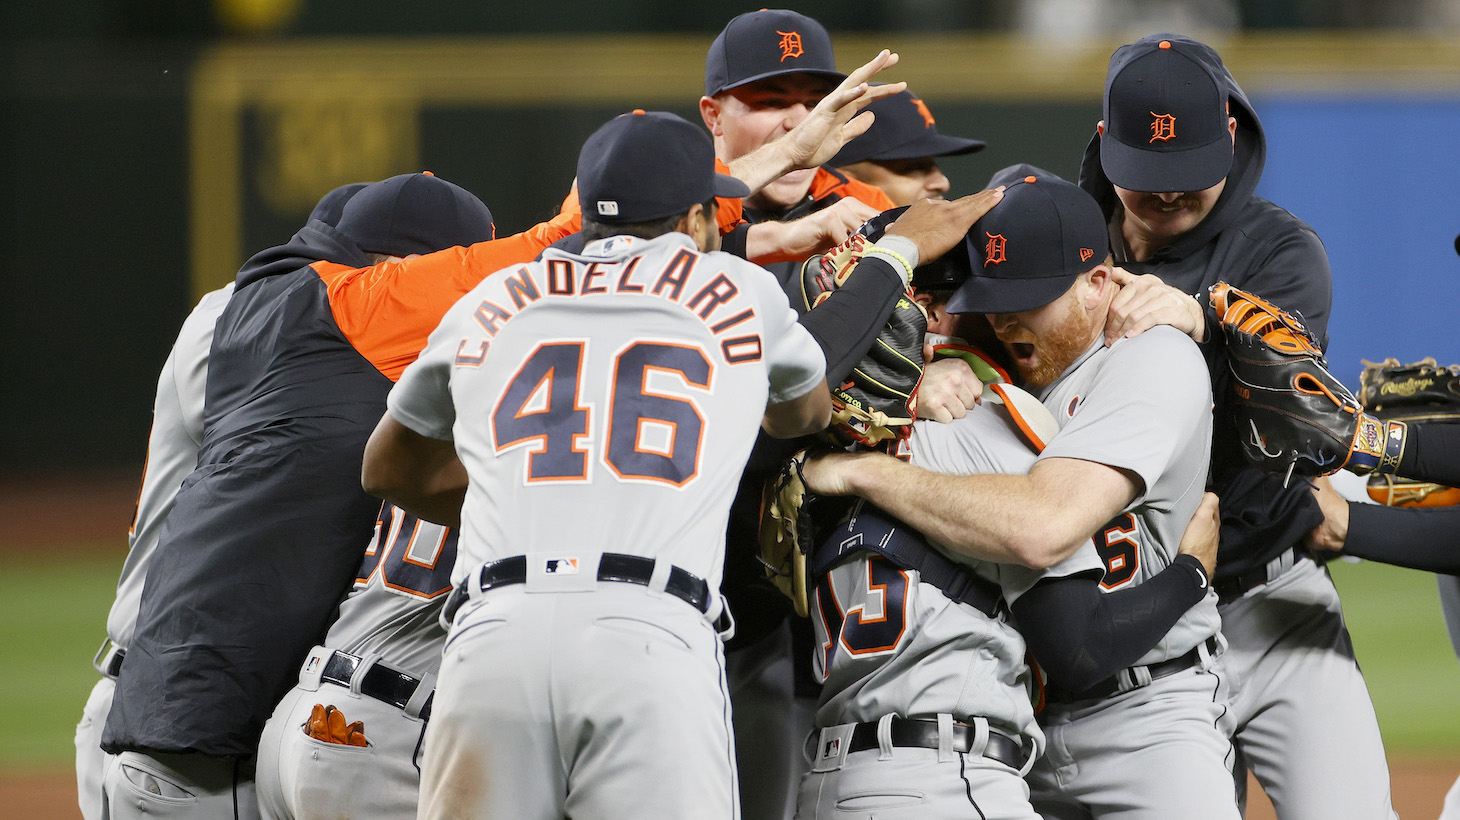 SEATTLE, WASHINGTON - MAY 18: Spencer Turnbull #56 of the Detroit Tigers celebrates with his teammates after a no-hitter against the Seattle Mariners at T-Mobile Park on May 18, 2021 in Seattle, Washington. The Tigers beat the Mariners 5-0. (Photo by Steph Chambers/Getty Images)